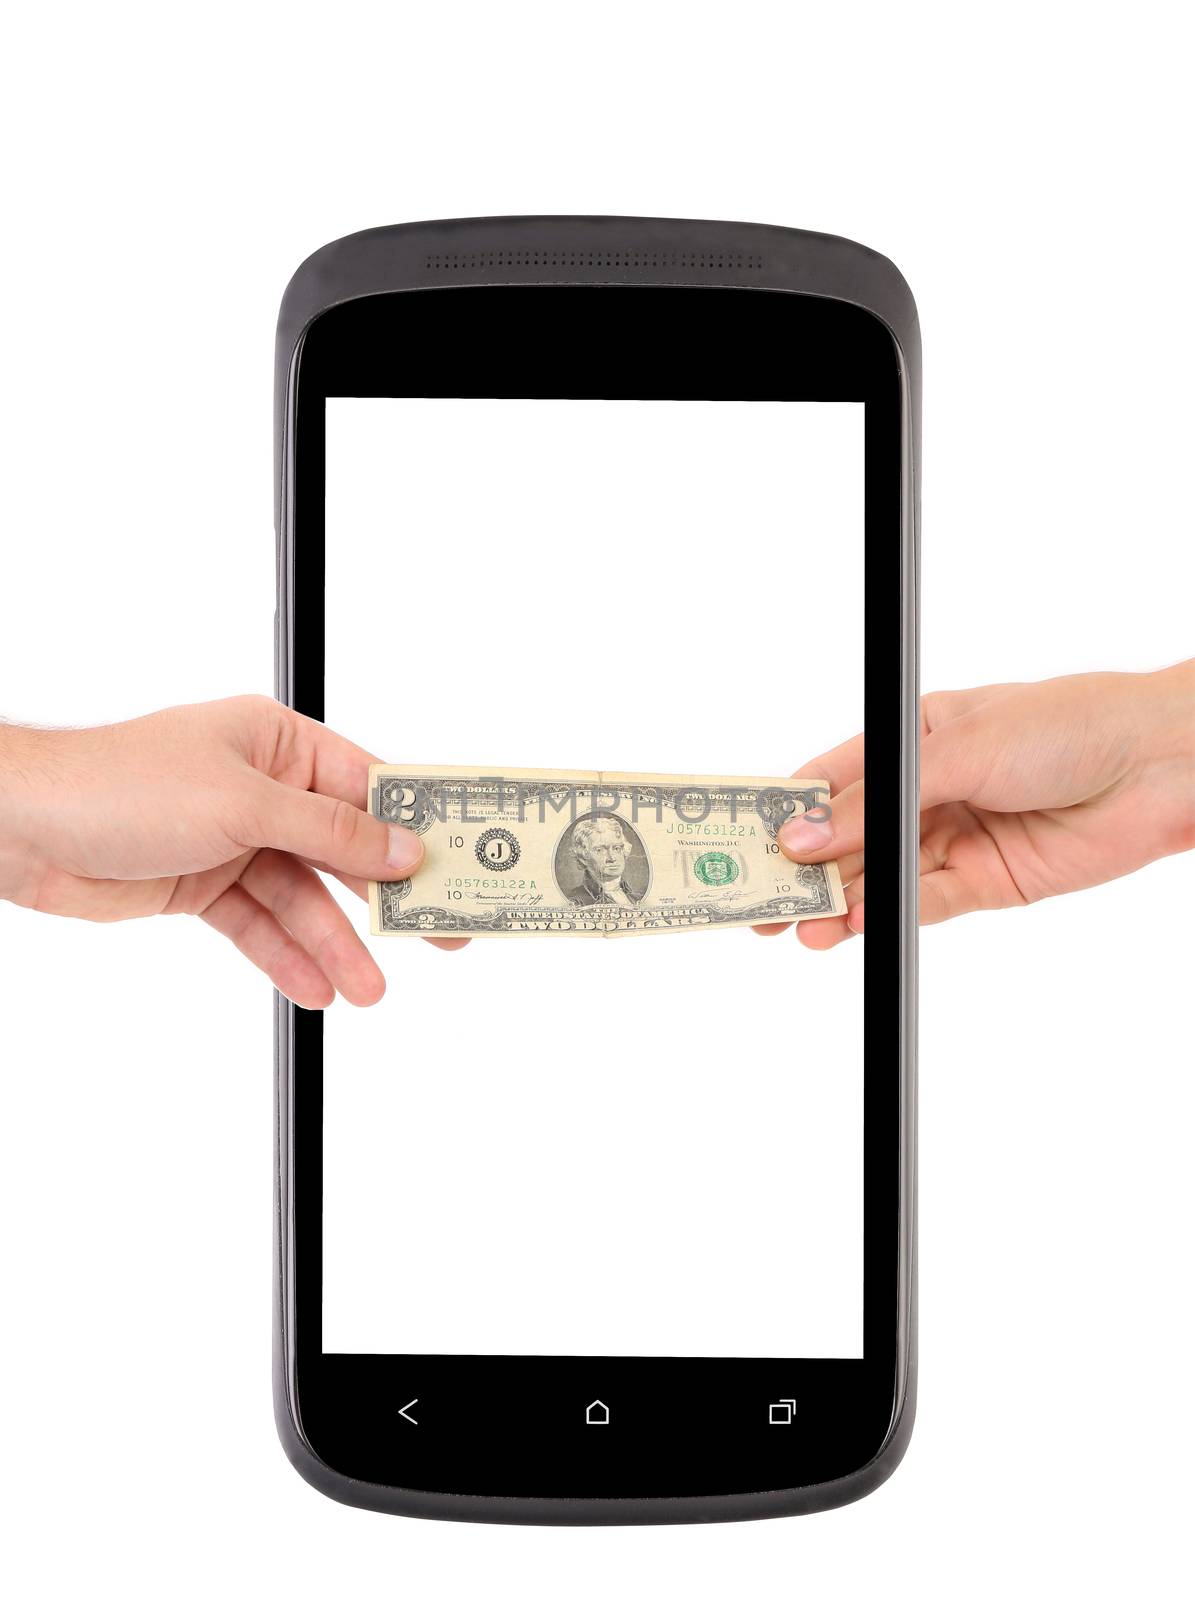 Mobile phone and two dollar bill. by indigolotos